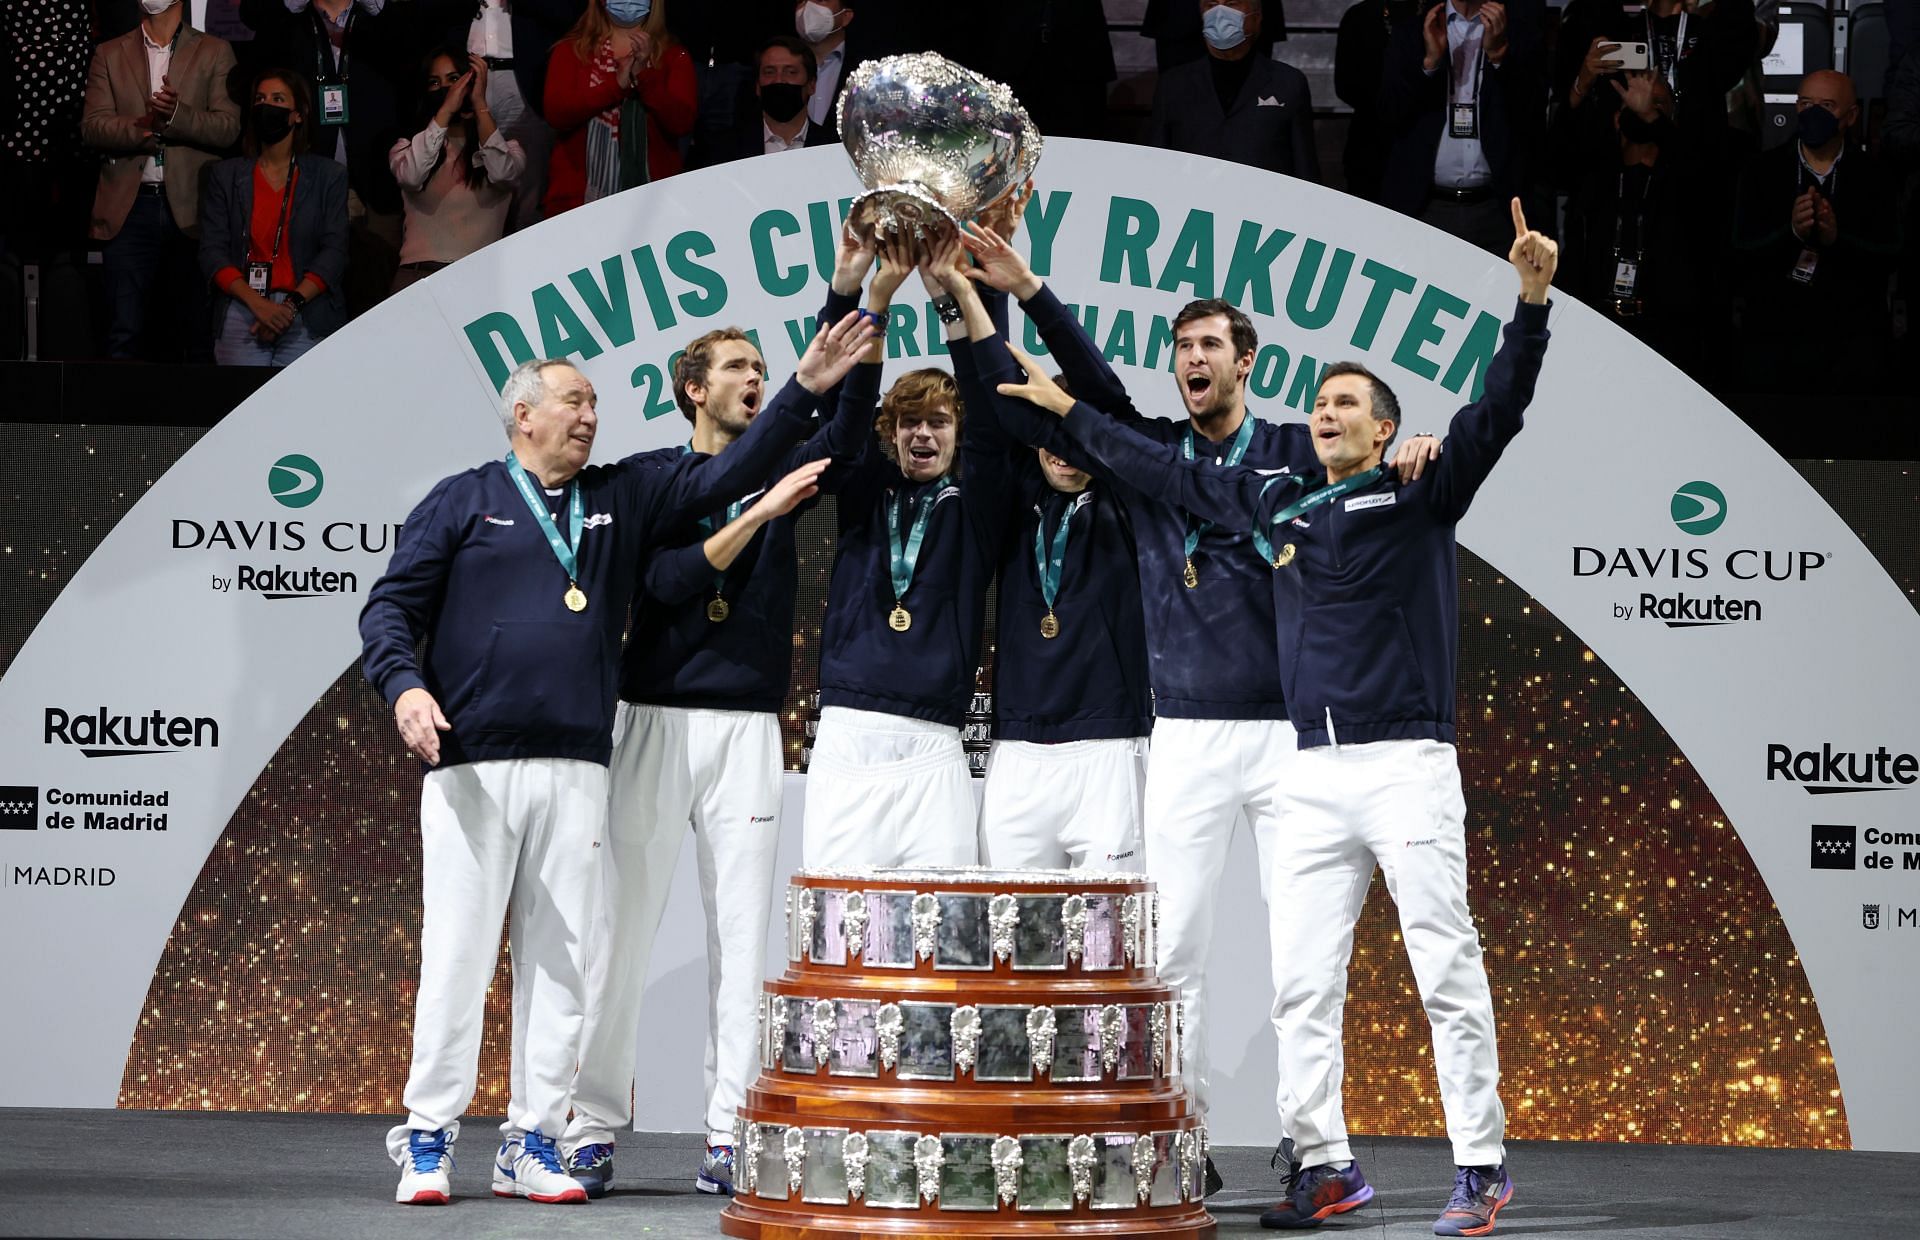 The Russian team at the 2021 Davis Cup Finals